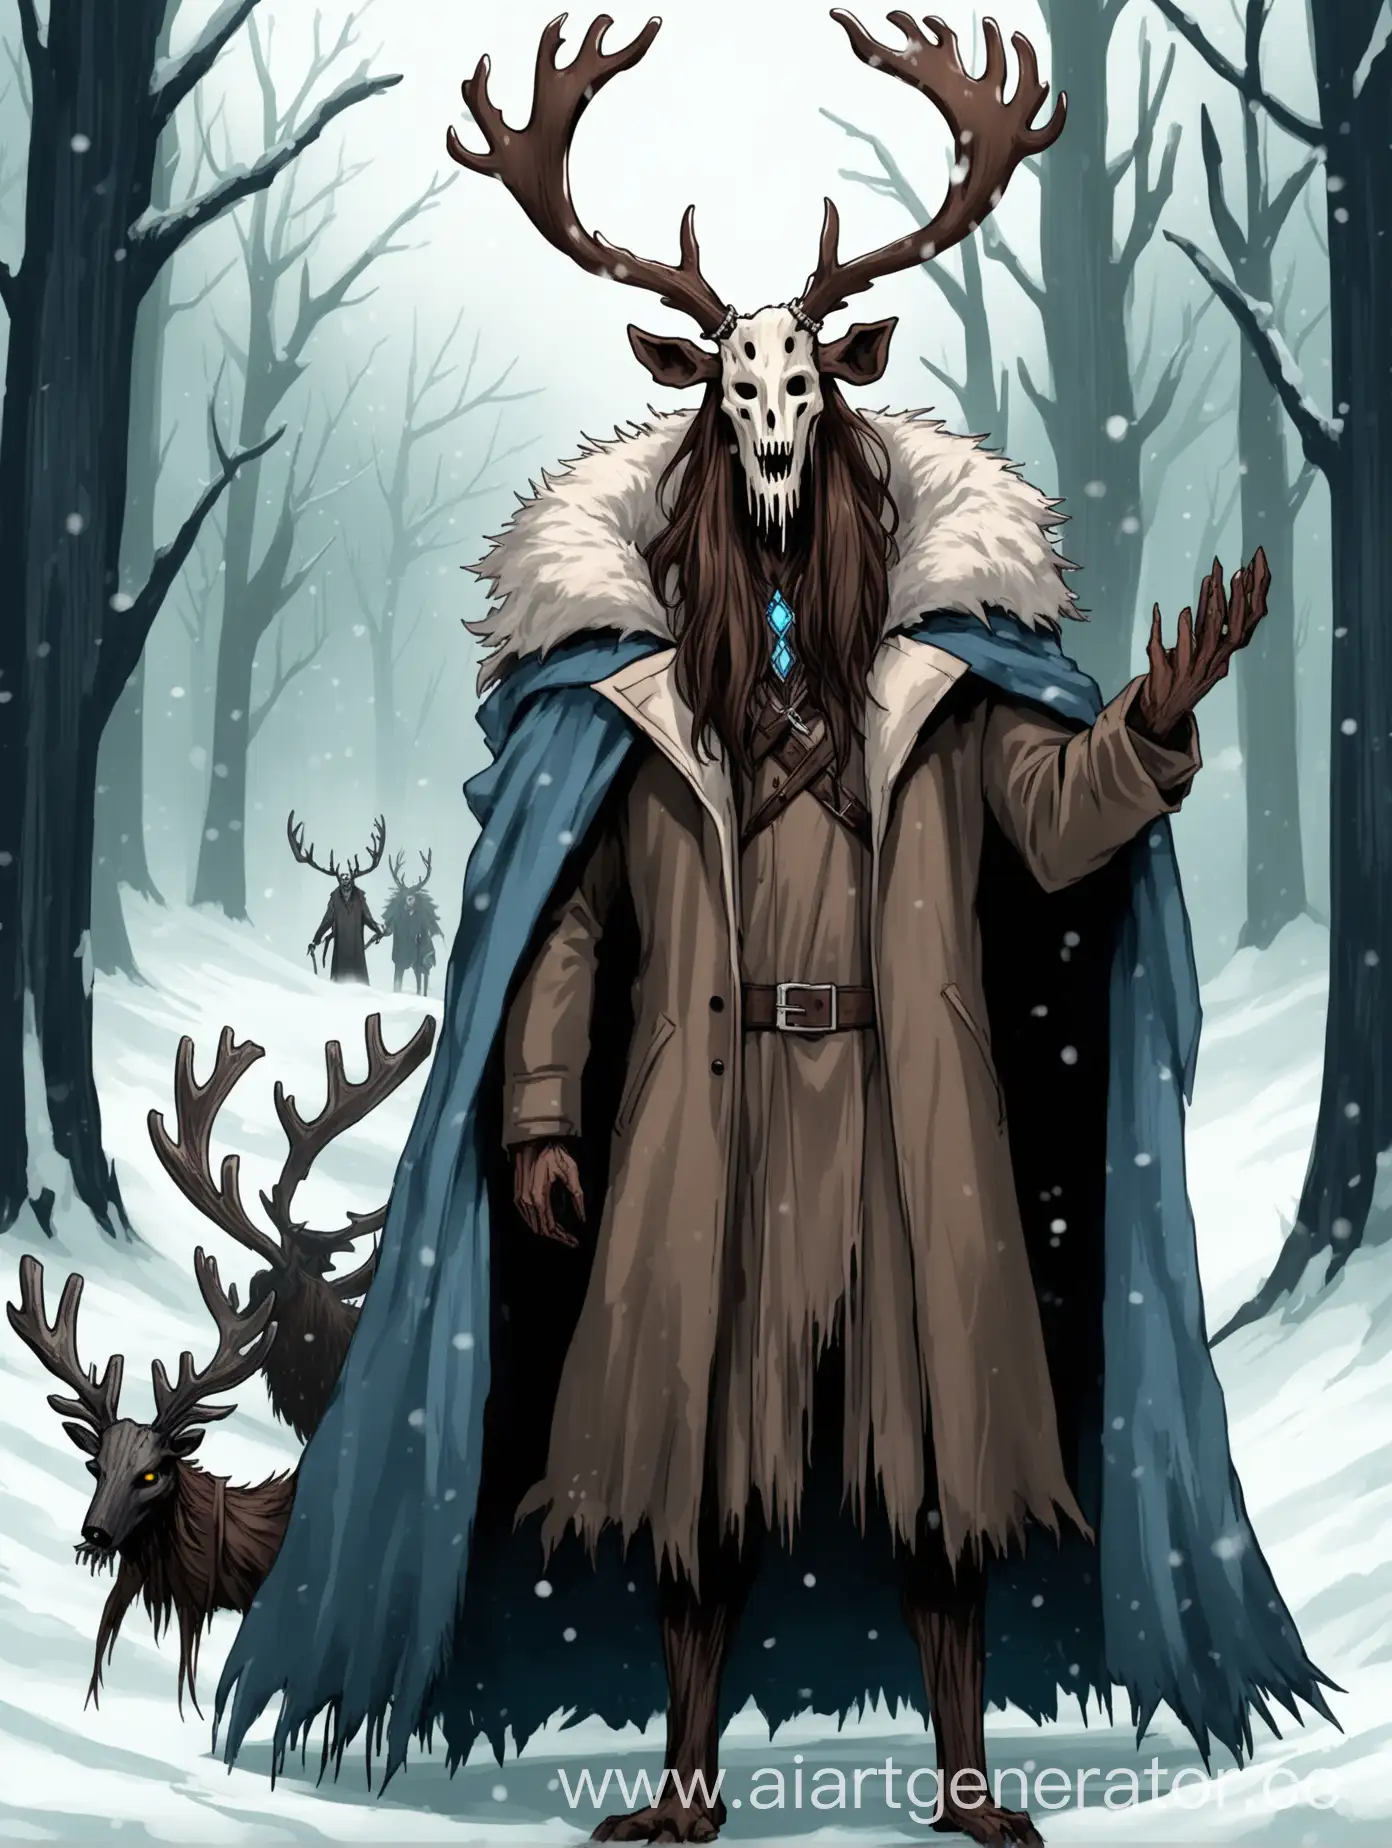 A tall guy with long brown hair. Cryomancer. Half man and half wendigo. Wears long winter coat with fur. Wears a wooden mask. Has a pair of big antlers.